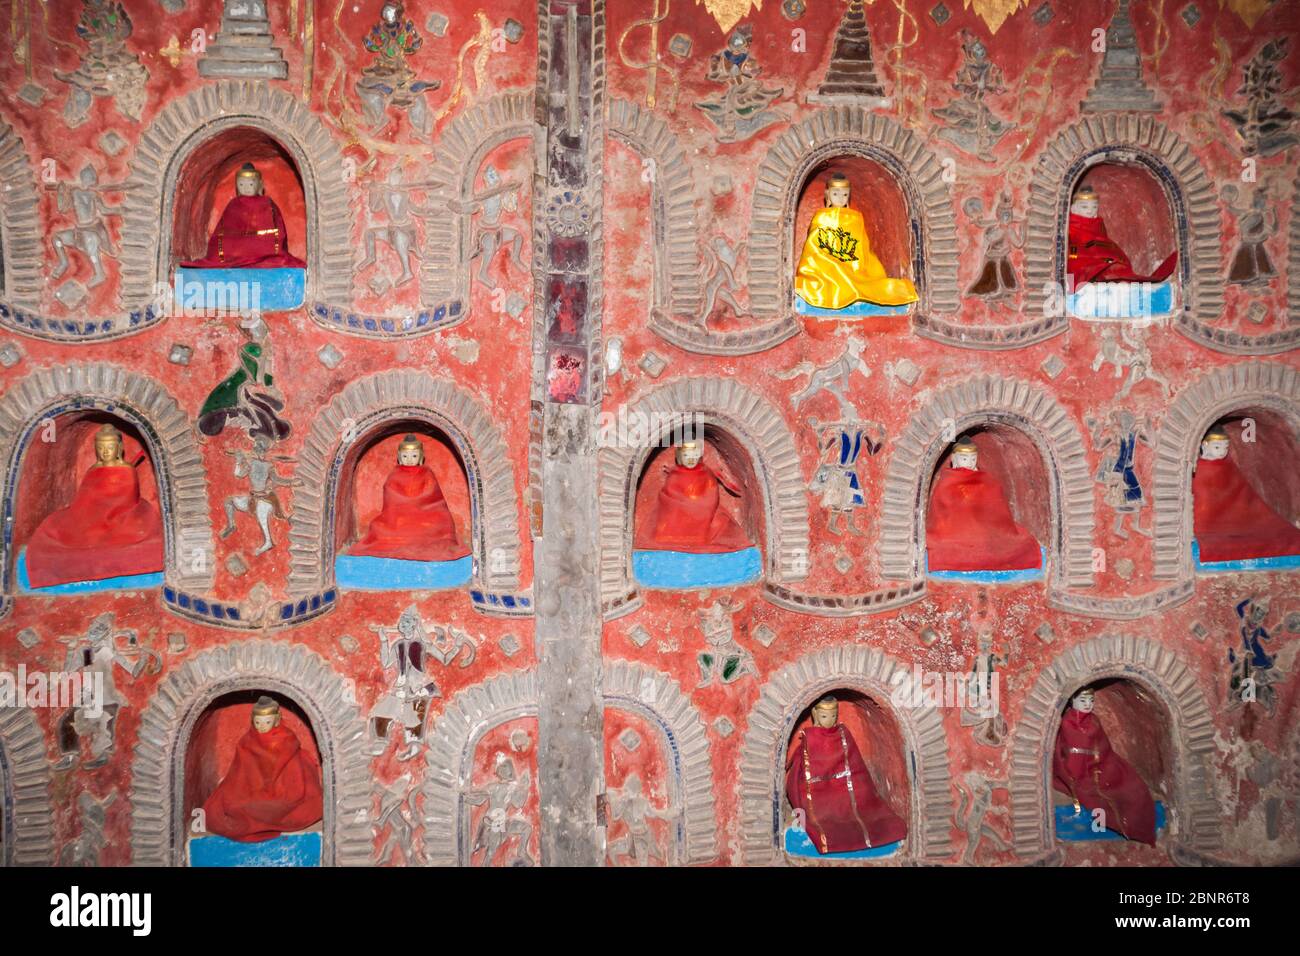 The Temple wall contains hundreds of Buddha statue's in alcove's the wall in Pagoda of Nyan Shwe Kgua temple near Inle lake,Shan state in Myanmar. Stock Photo